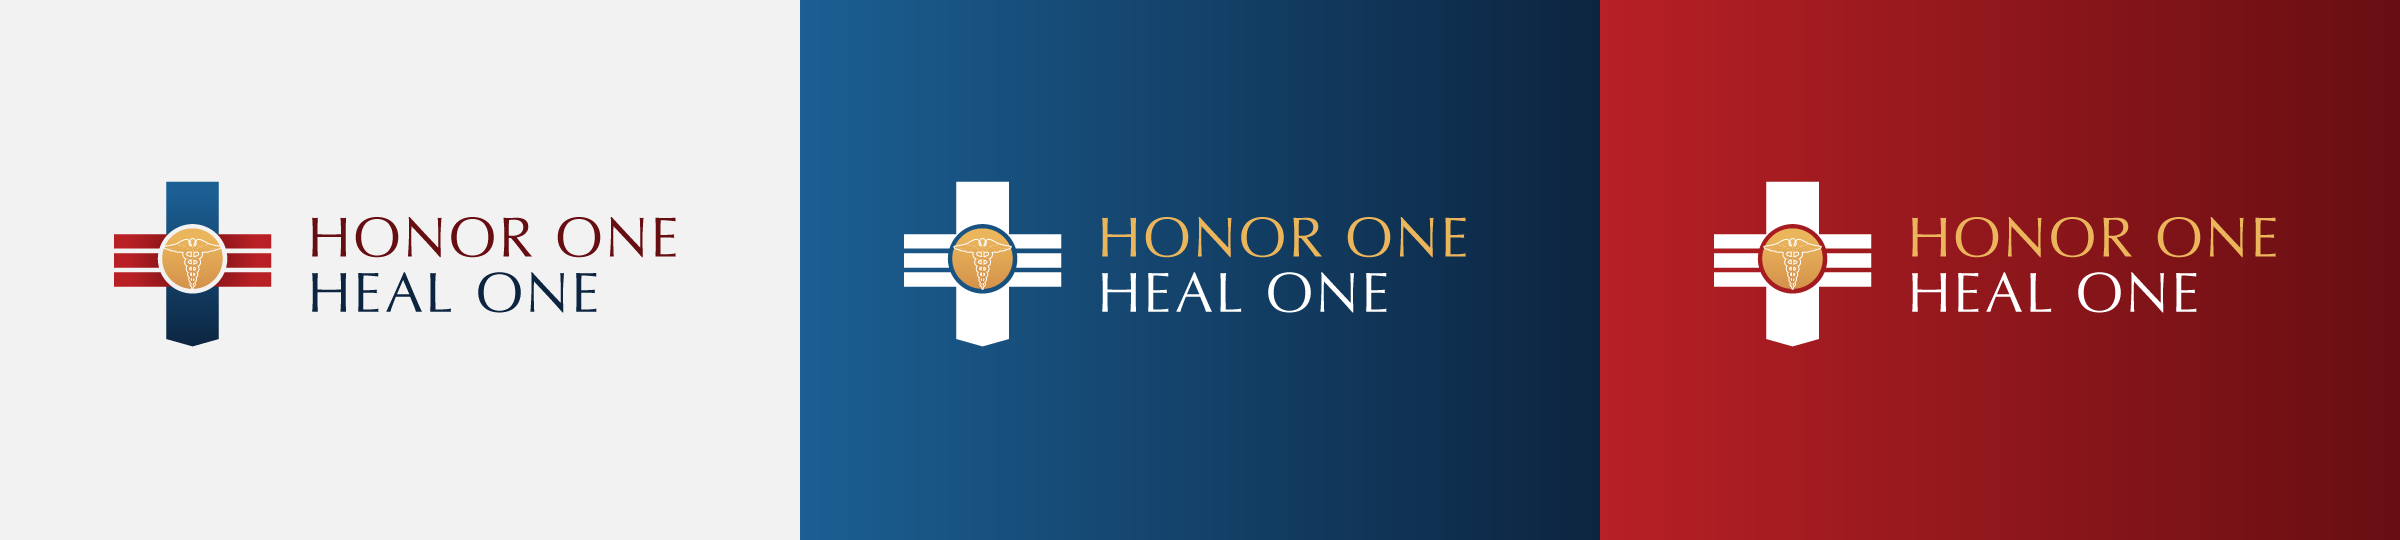 Honor One Heal One Logo Color Variants